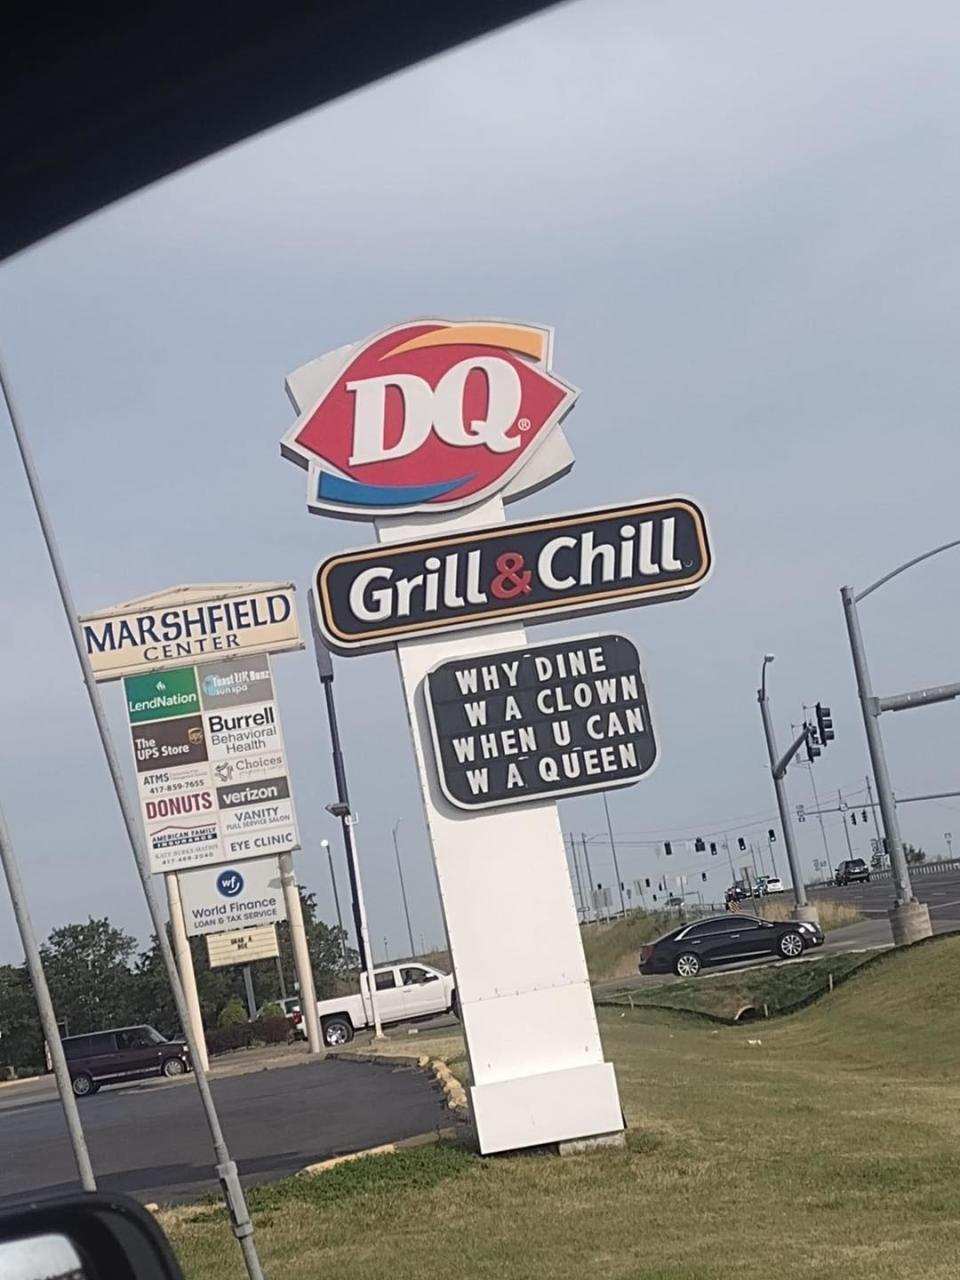 Dairy Queen's sign says "Why dine with a clown when you can with a queen"